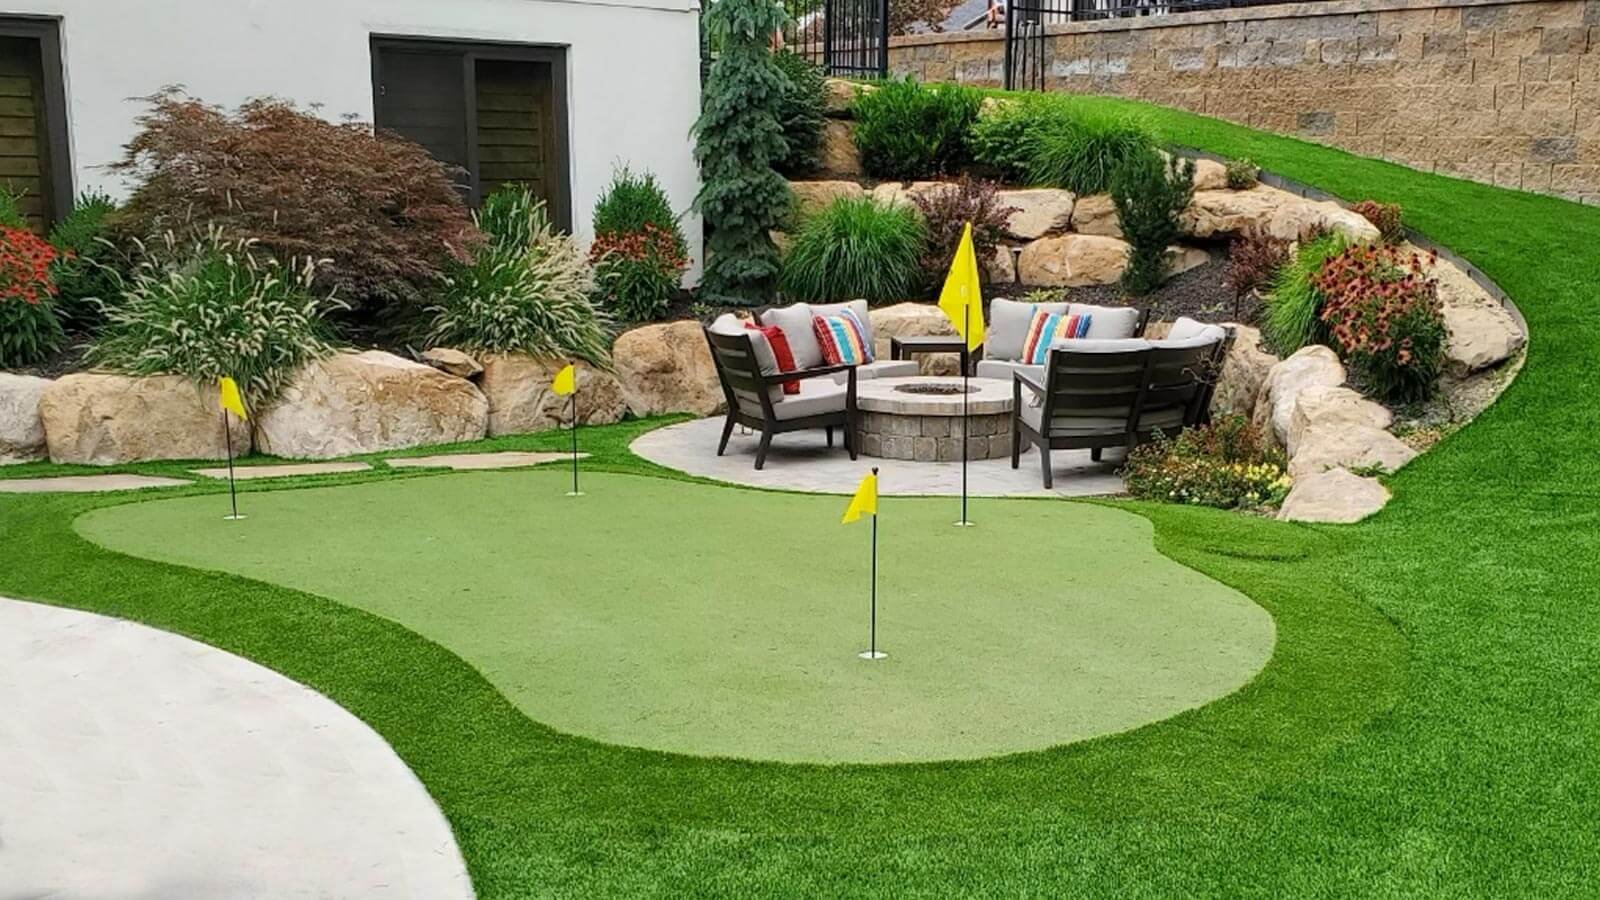 Putting in an artificial putting green is a creative landscape design and construction idea.